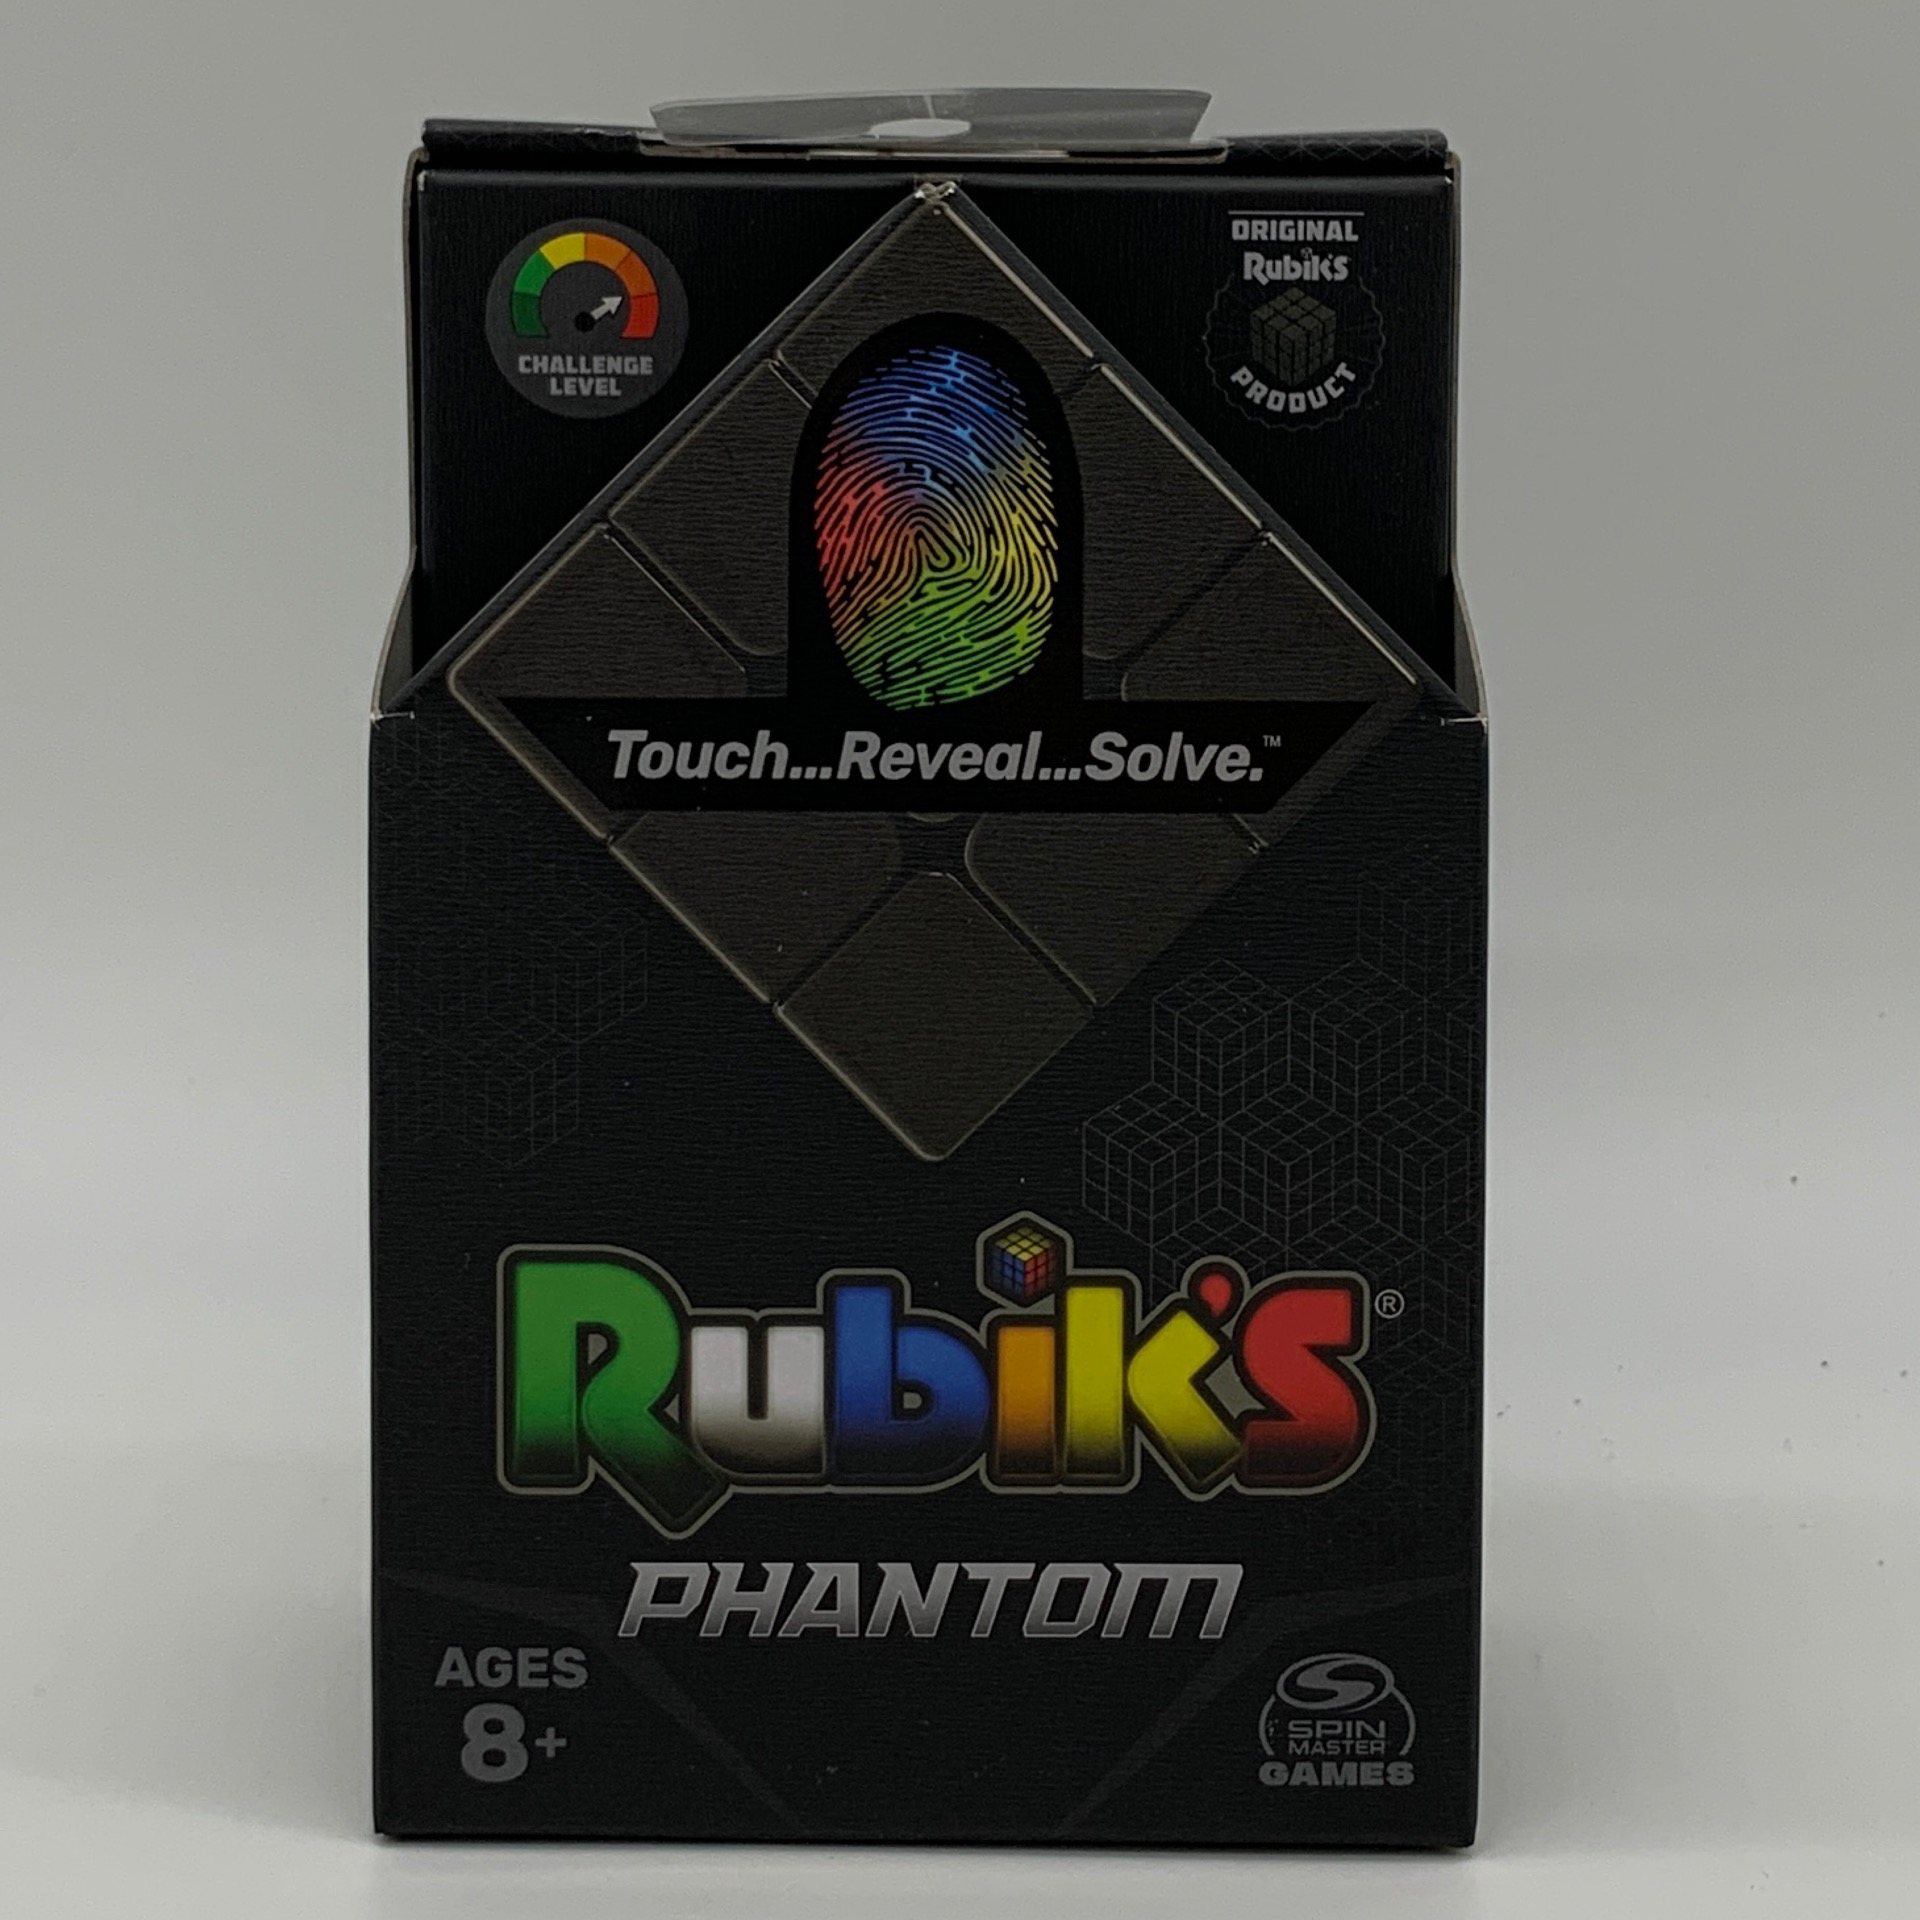 Rubik's Phantom Cube – Act Your Age (or don't)